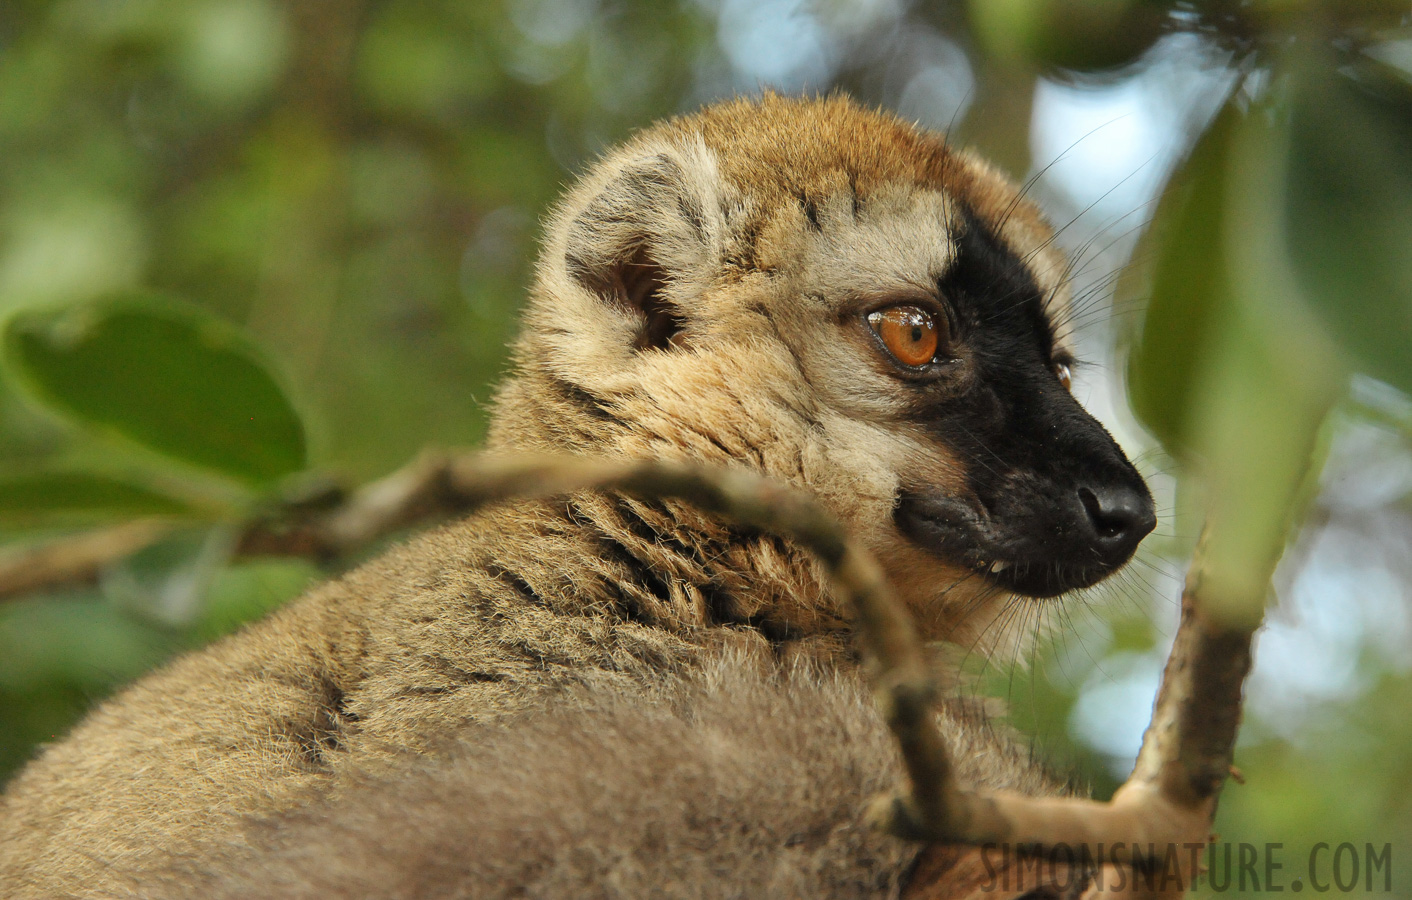 Eulemur rufifrons [300 mm, 1/400 sec at f / 9.0, ISO 4000]